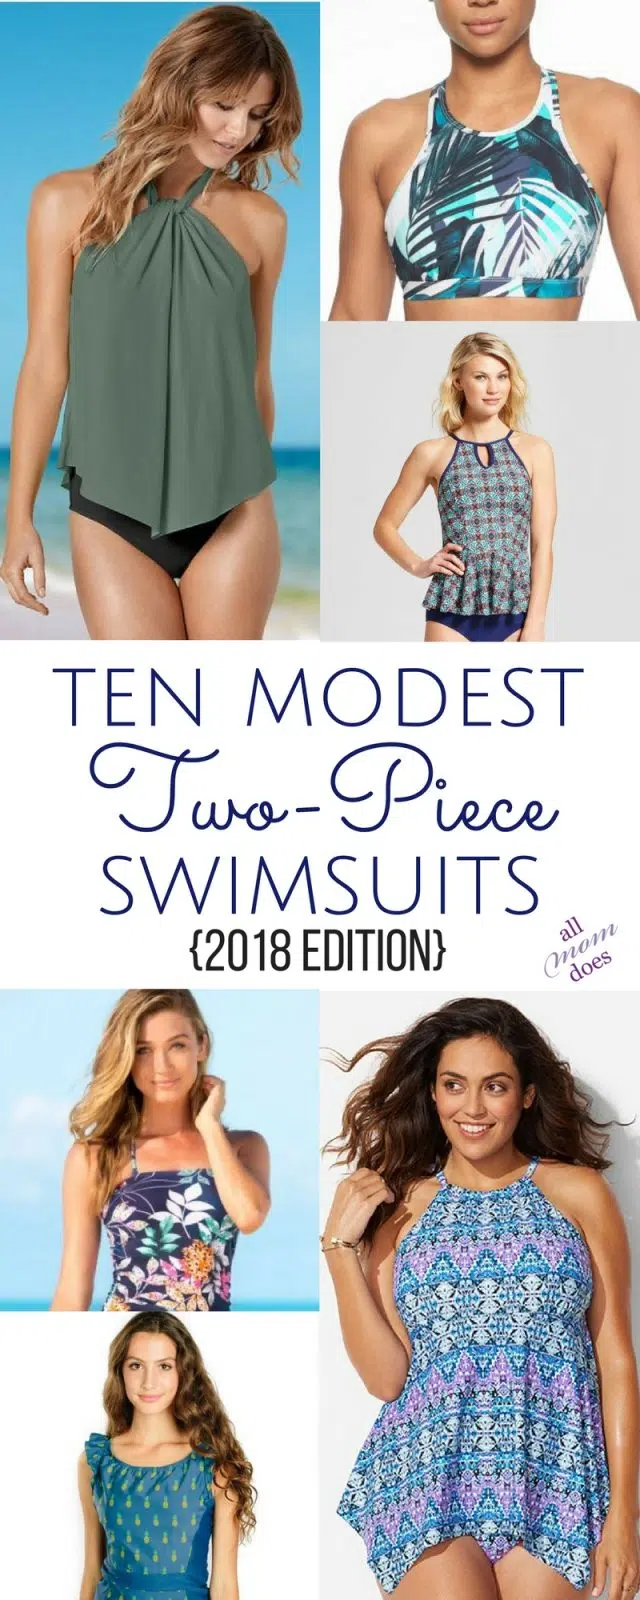 Bikinis and Tankinis that still offer coverage. Modest two-piece swimsuits! #swimsuits #bikini #modesty